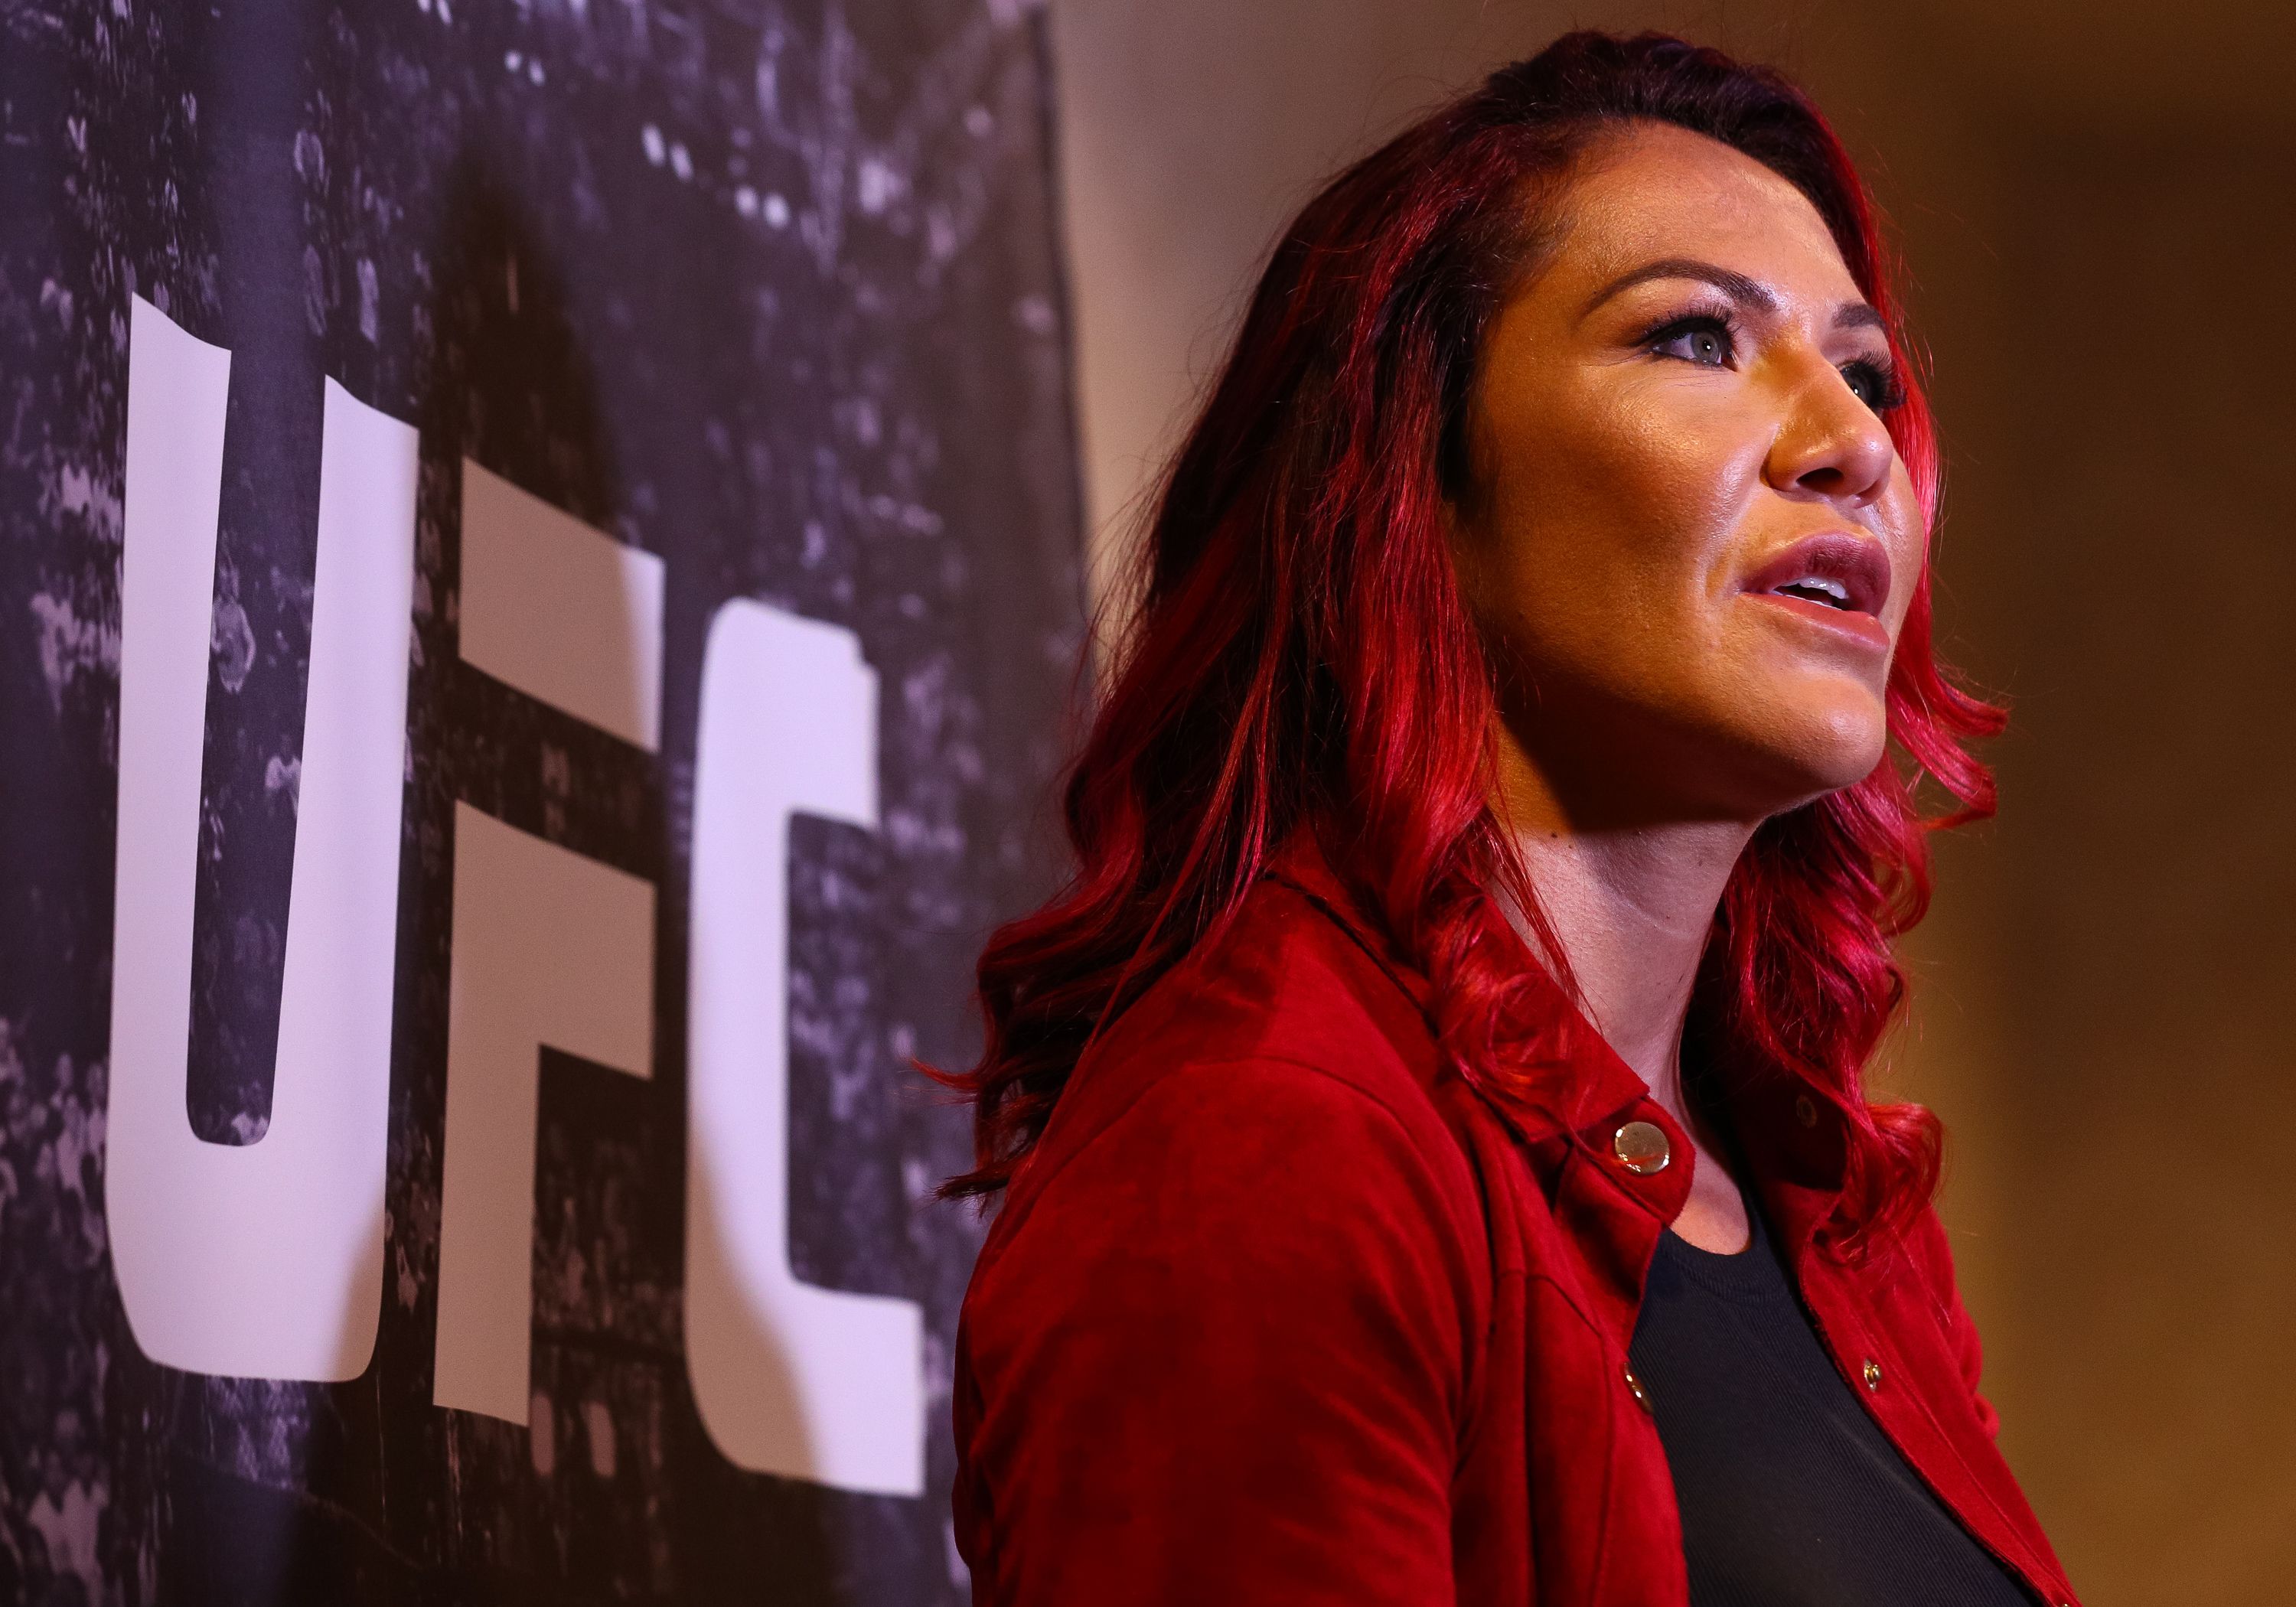 UFC Featherweight Champion Cris Cyborg attends a press conference